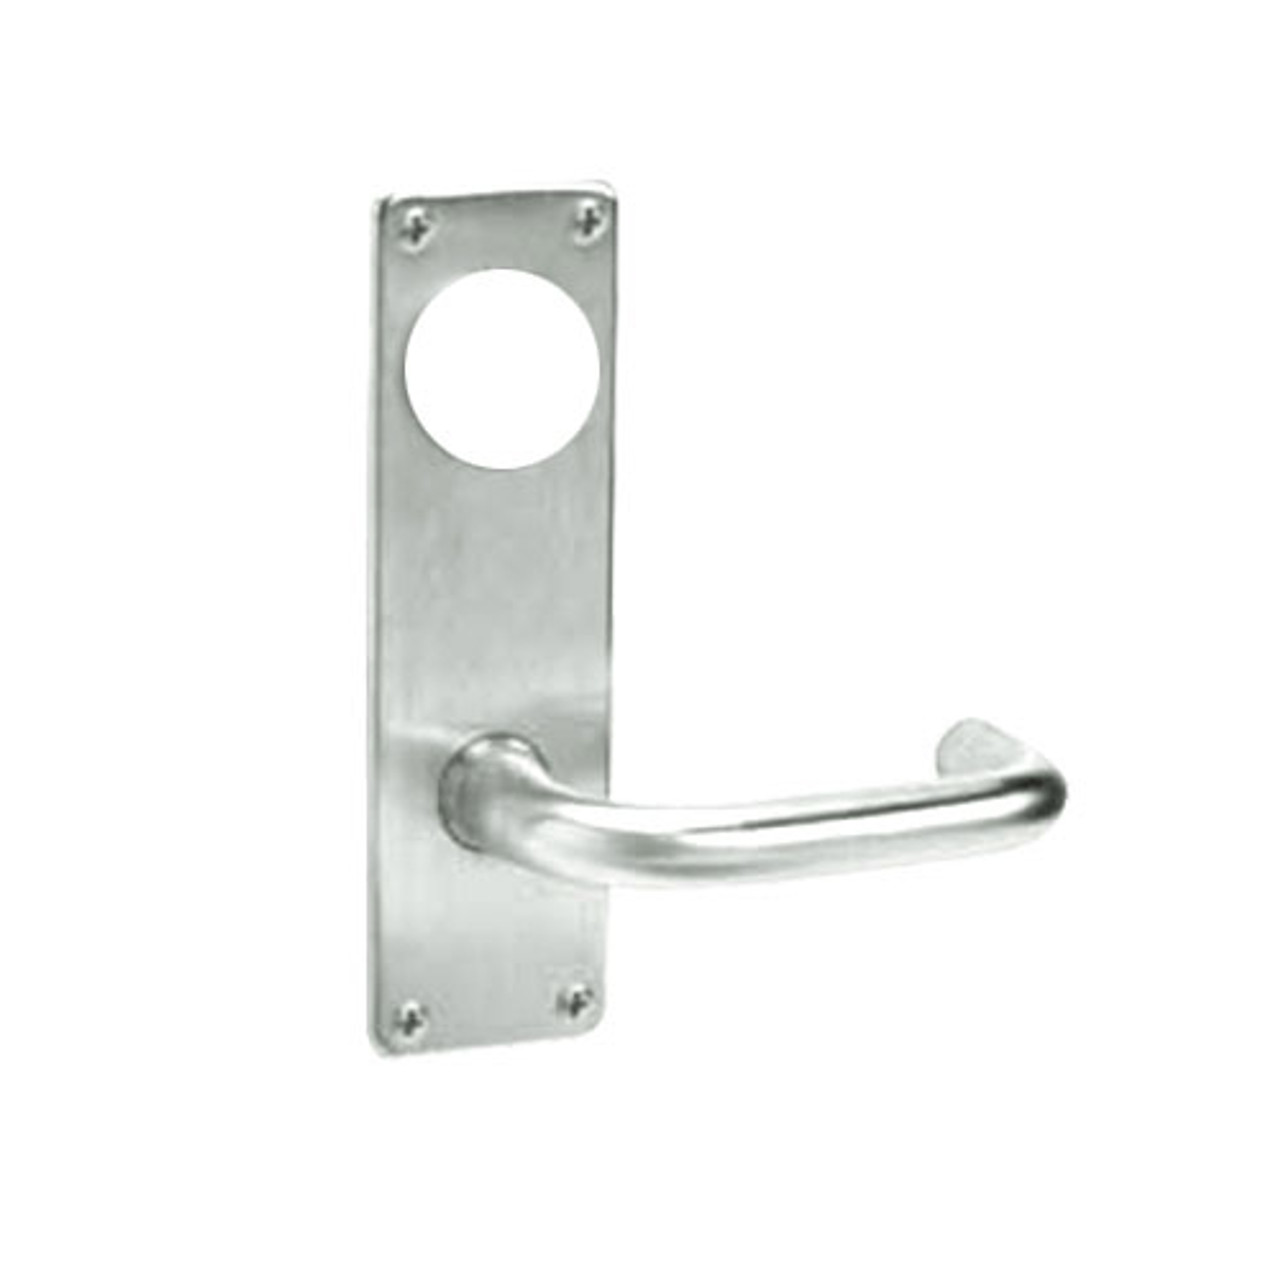 ML2042-LSN-618-LC Corbin Russwin ML2000 Series Mortise Entrance Locksets with Lustra Lever in Bright Nickel